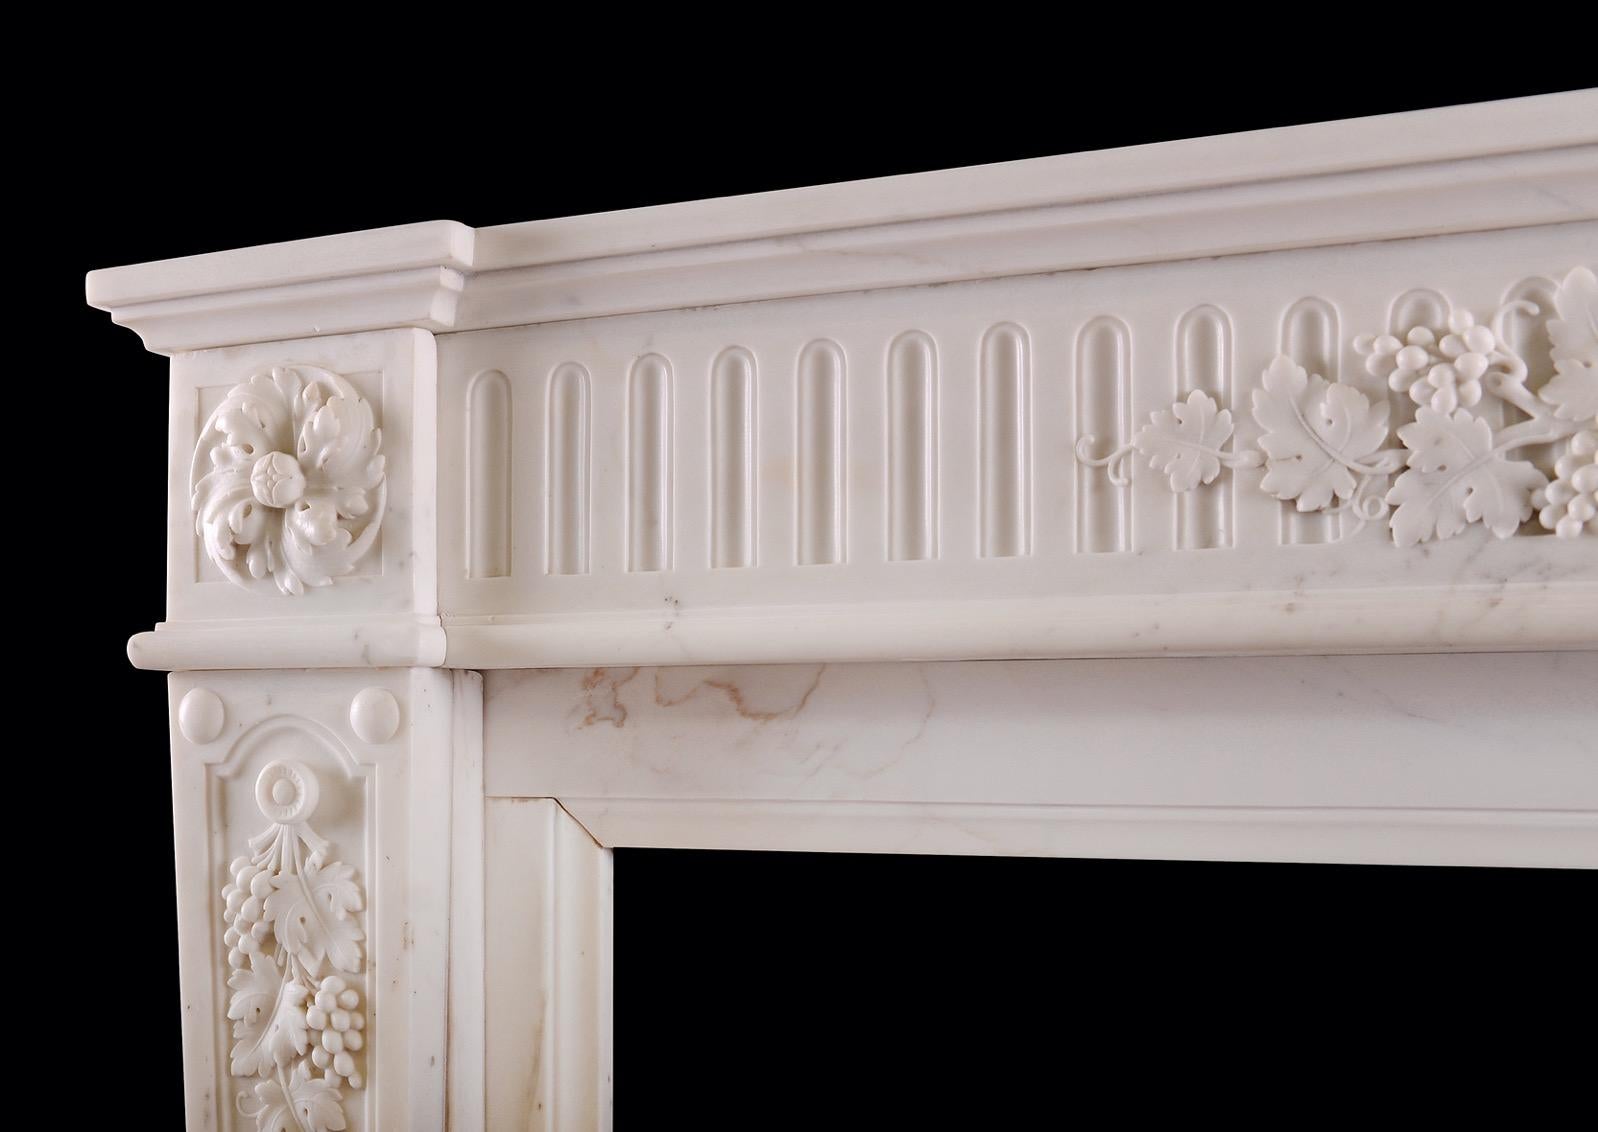 A fine quality Statuary marble fireplace in the Louis XVI style. The tapering, stop-fluted jambs surmounted by panel carved with grapes and leaf work with swirling rosette paterae above. The fluted frieze with carved grapes and leaf work throughout.